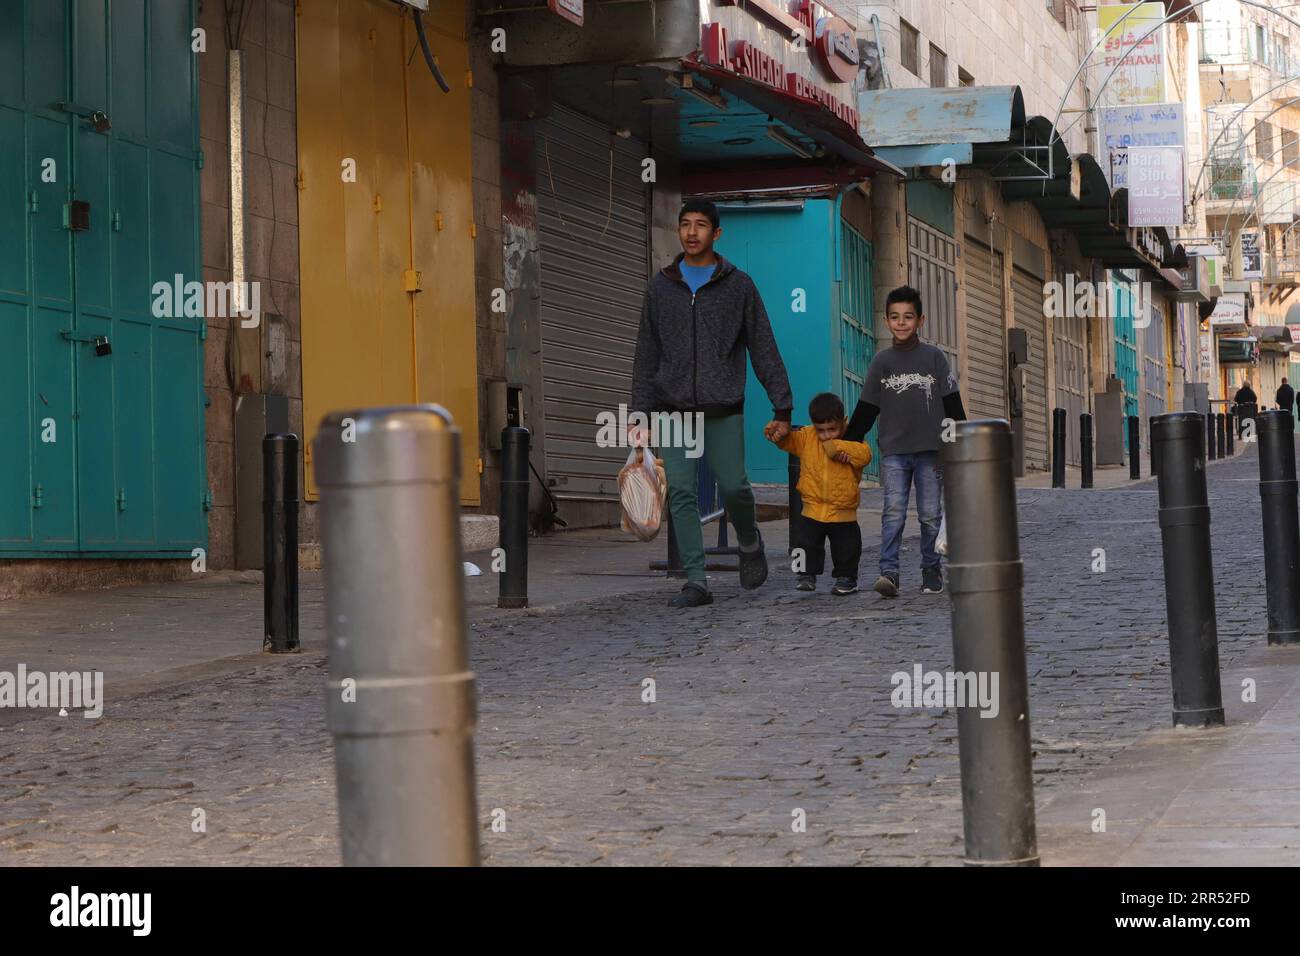 201219 -- BETHLEHEM, Dec. 19, 2020 -- Palestinians walk on a street in the West Bank city of Bethlehem amid a lockdown, on Dec. 19, 2020. A full lockdown and curfew have been imposed in the West Bank and the Gaza Strip to curb the growing numbers of COVID-19 infections and deaths. Photo by /Xinhua MIDEAST-BETHLEHEM-COVID-19-LOCKDOWN MamounxWazwaz PUBLICATIONxNOTxINxCHN Stock Photo